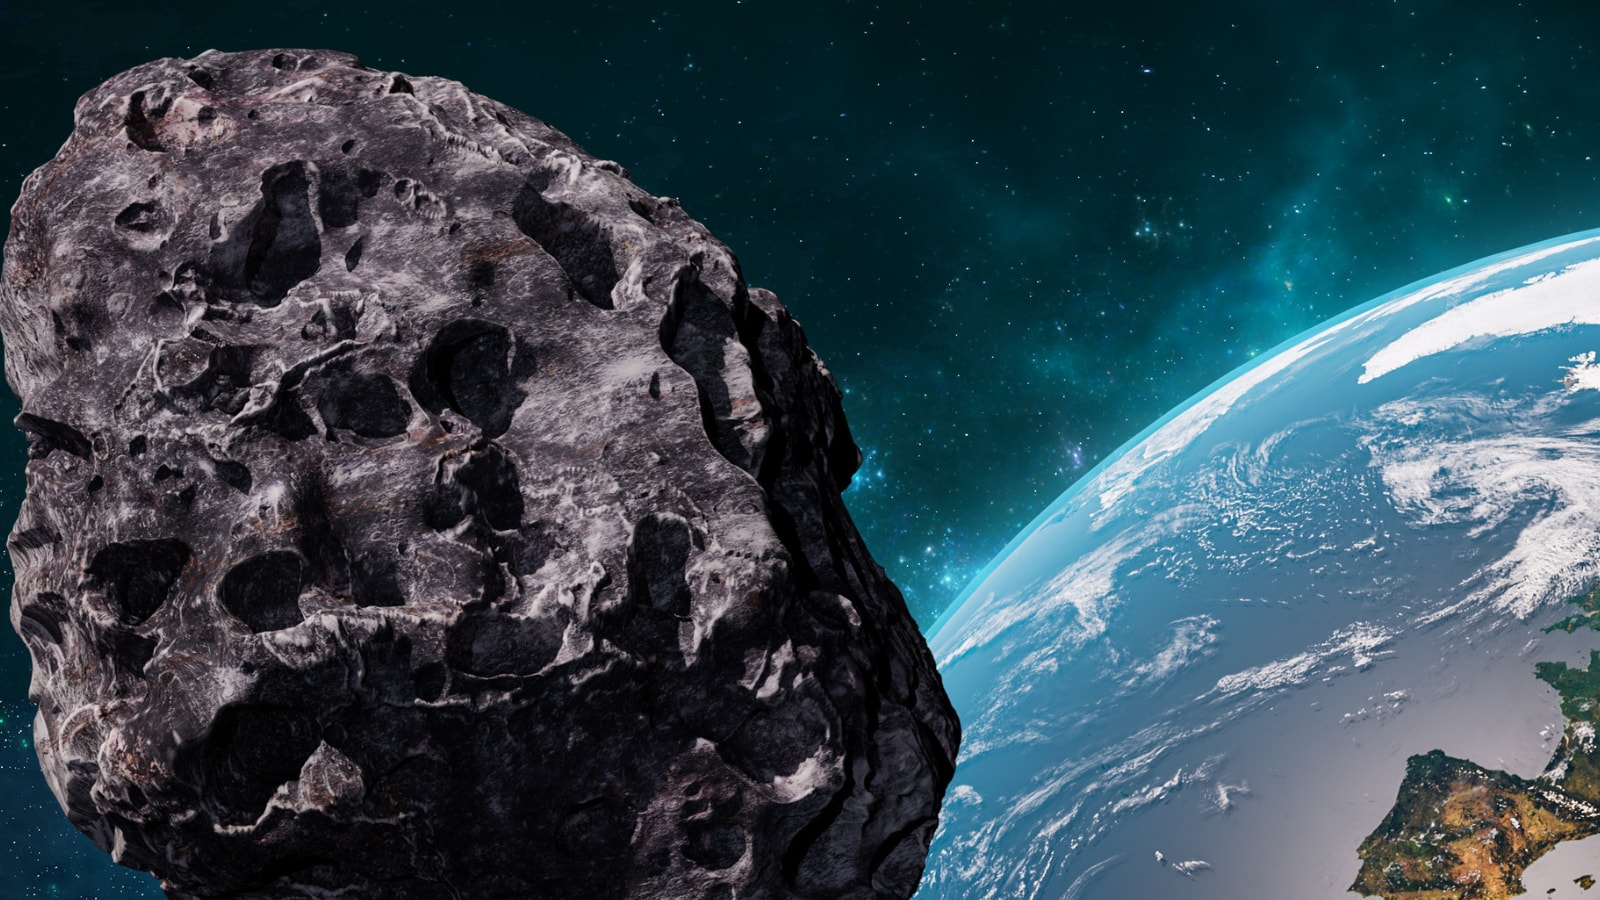 Potentially Hazardous Asteroid to Zoom Past Earth at Speed of 37,400 km/h: NASA